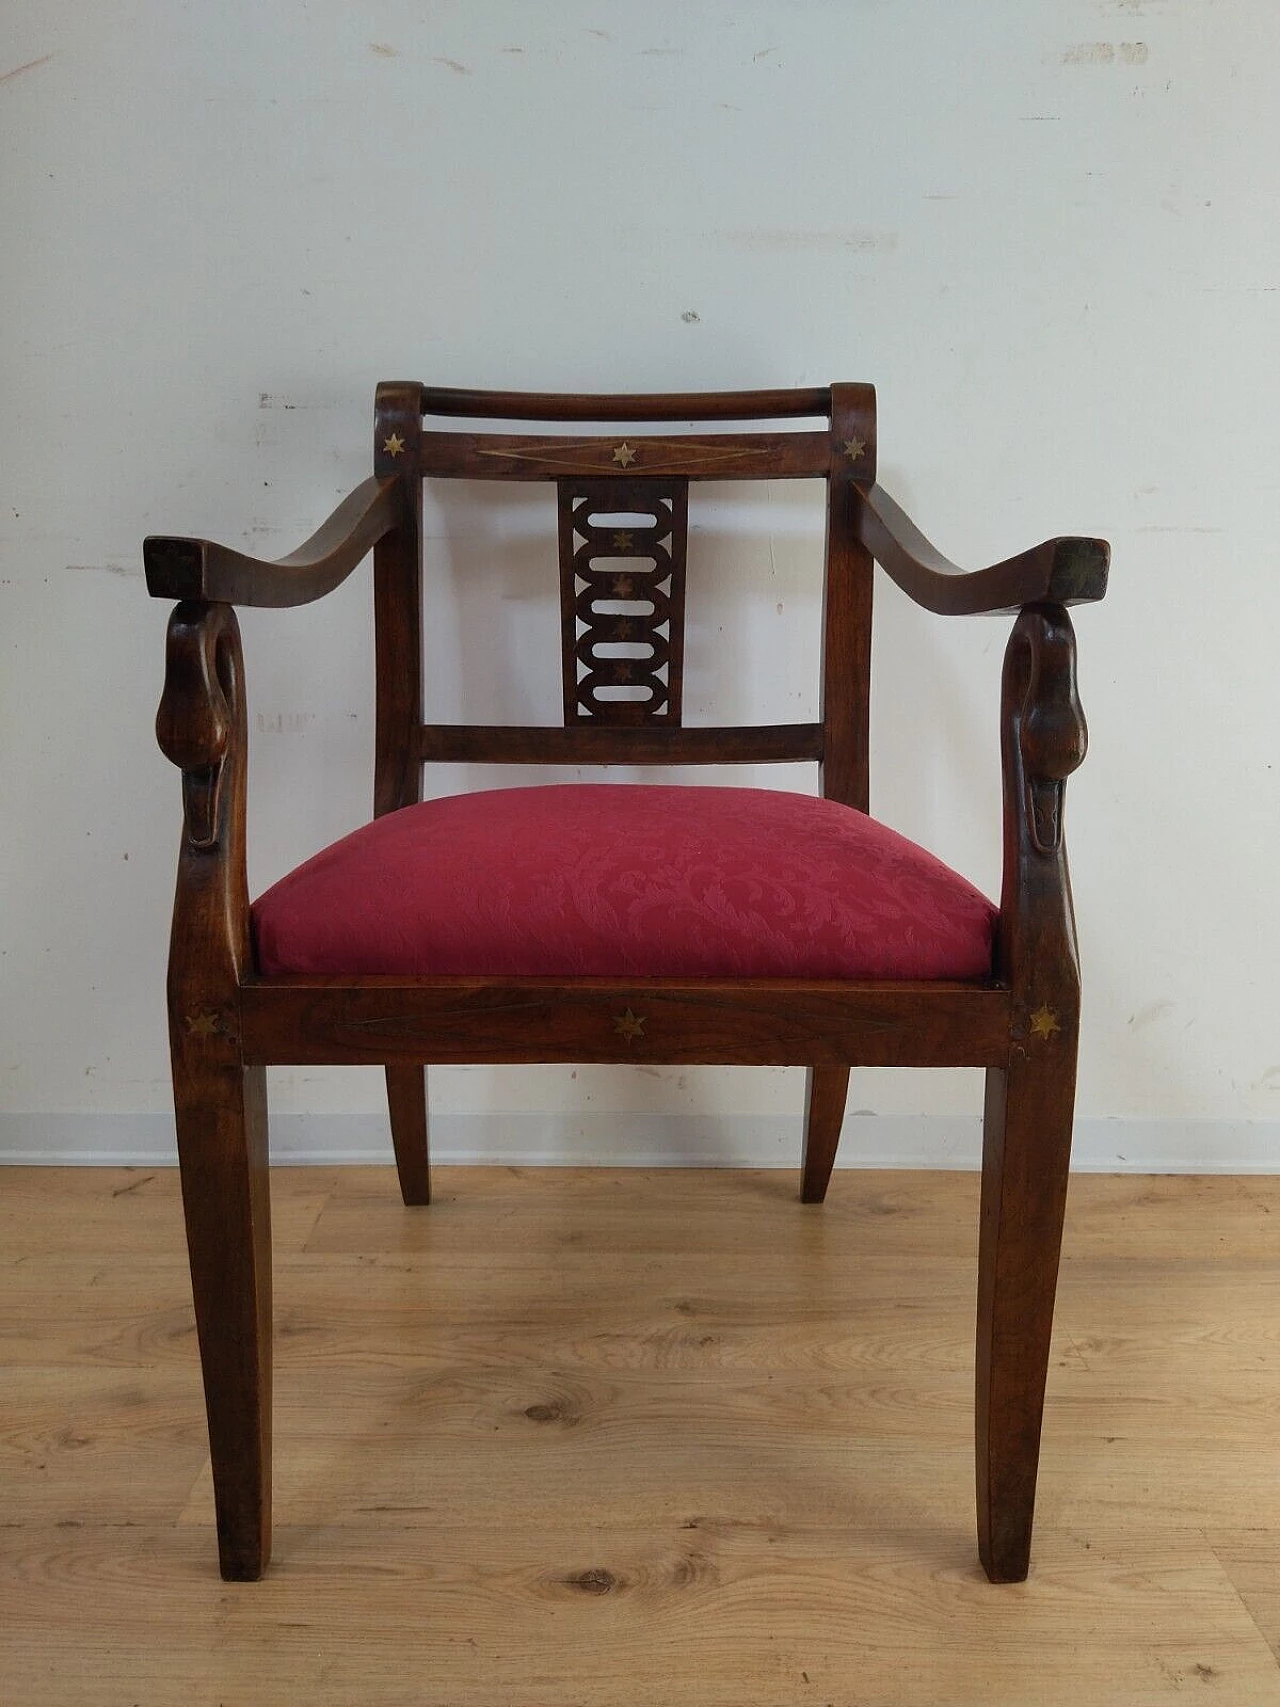 Empire walnut armchair with brass inlays, early 19th century 18